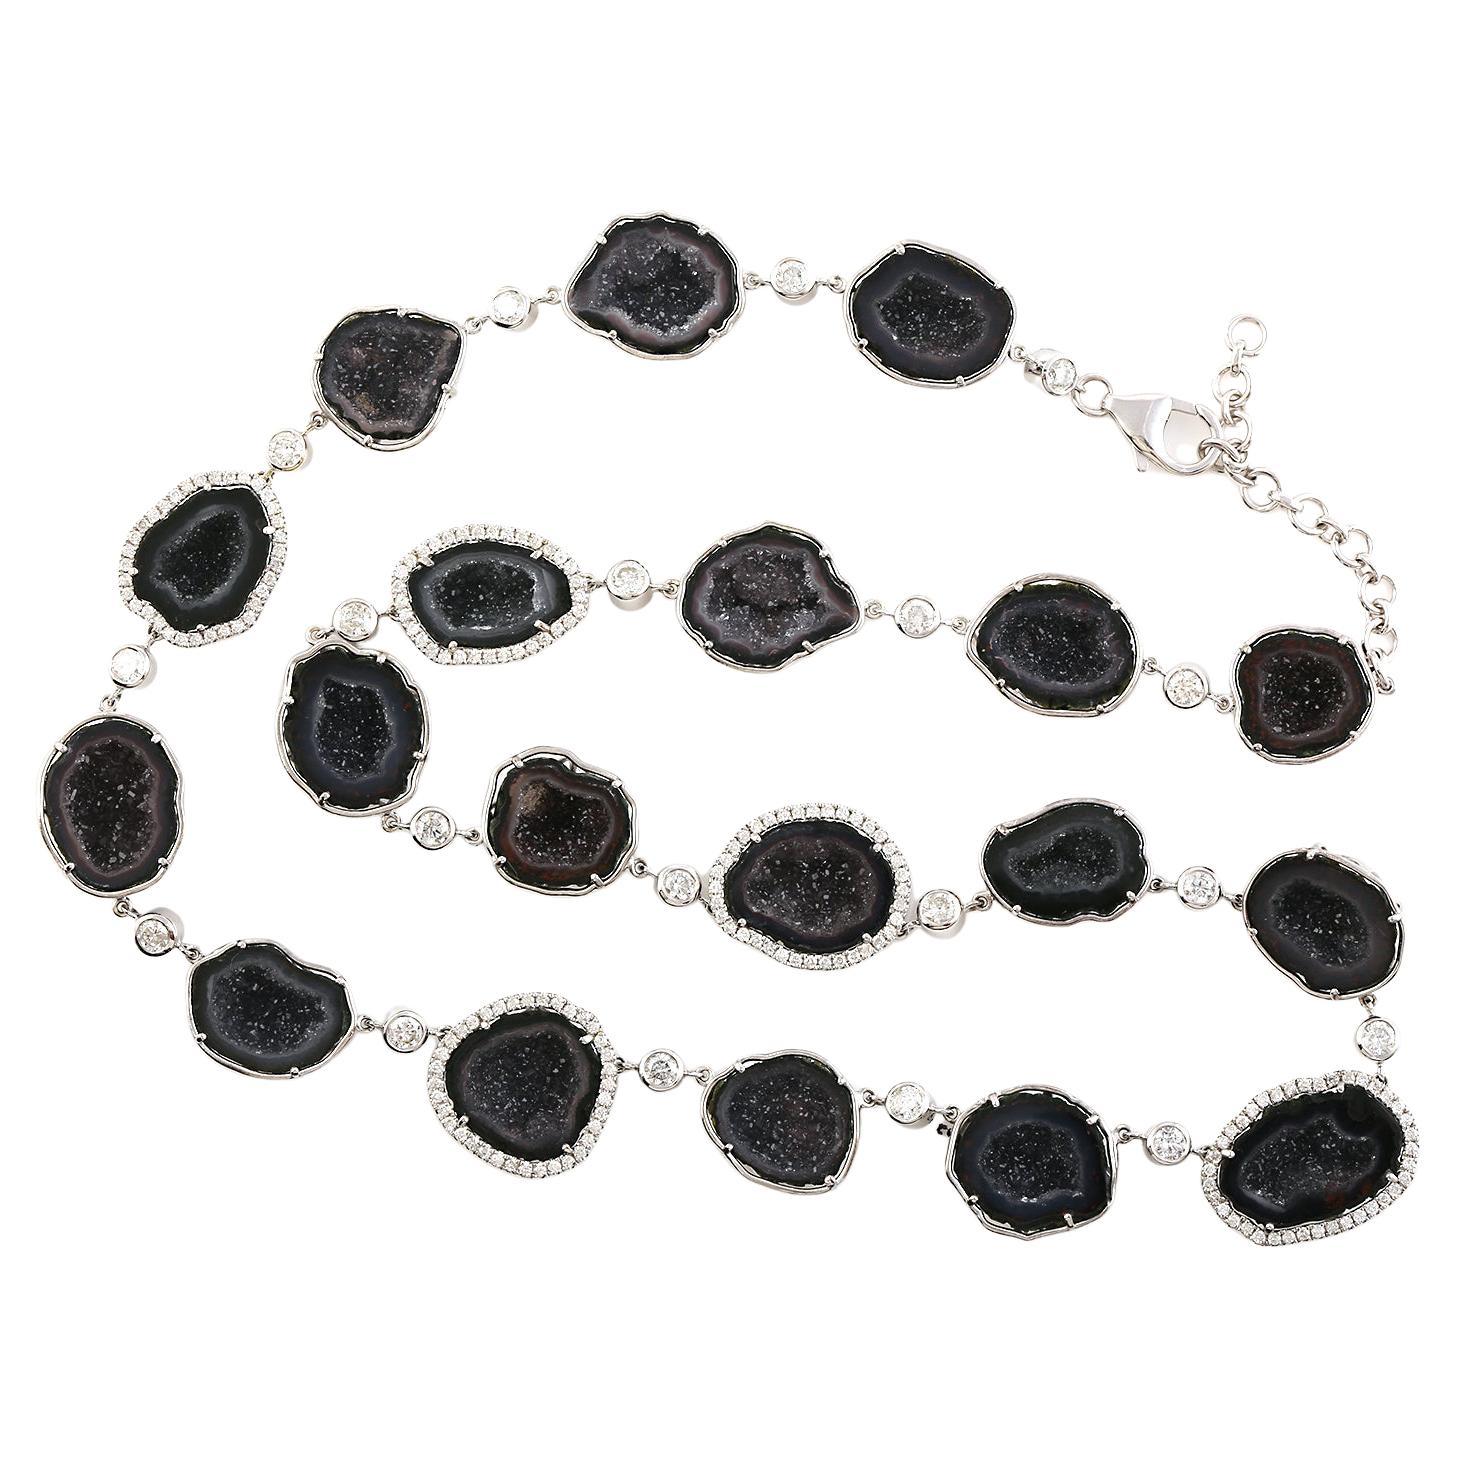 Sliced Geode Chain Necklace with Pave Diamonds Made in 14k White Gold